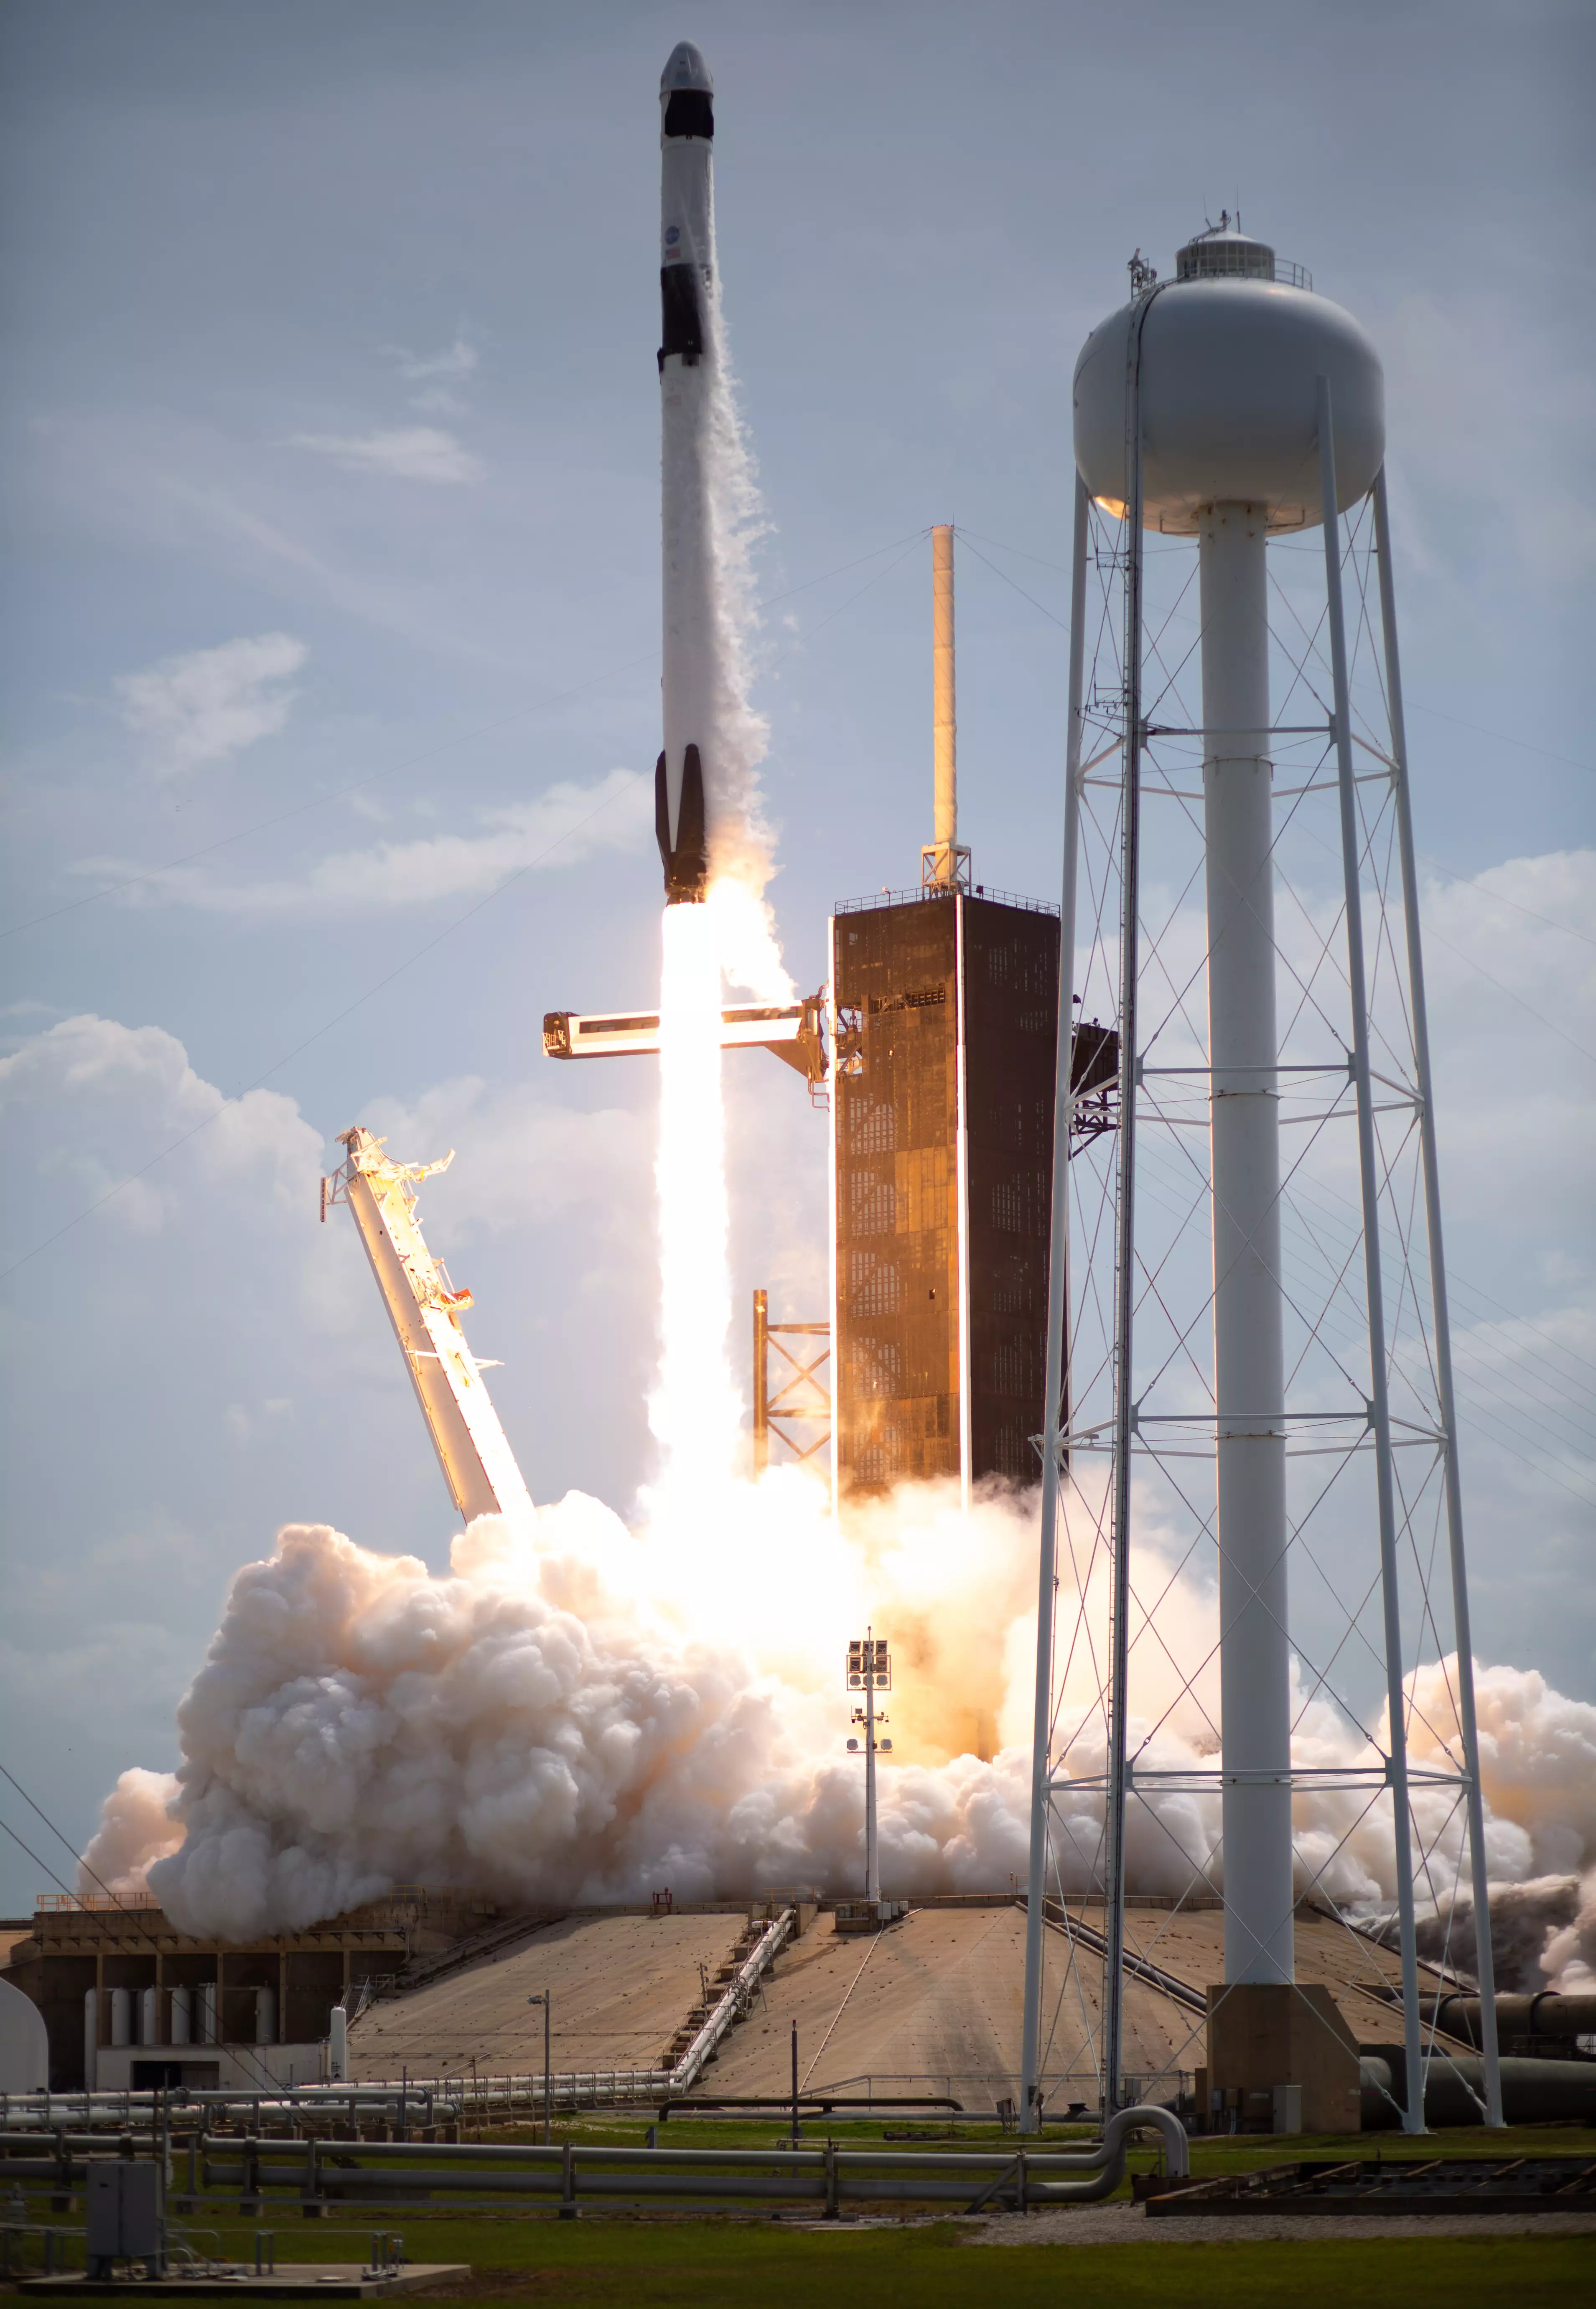 The SpaceX shuttle managed to launch on the second attempt.